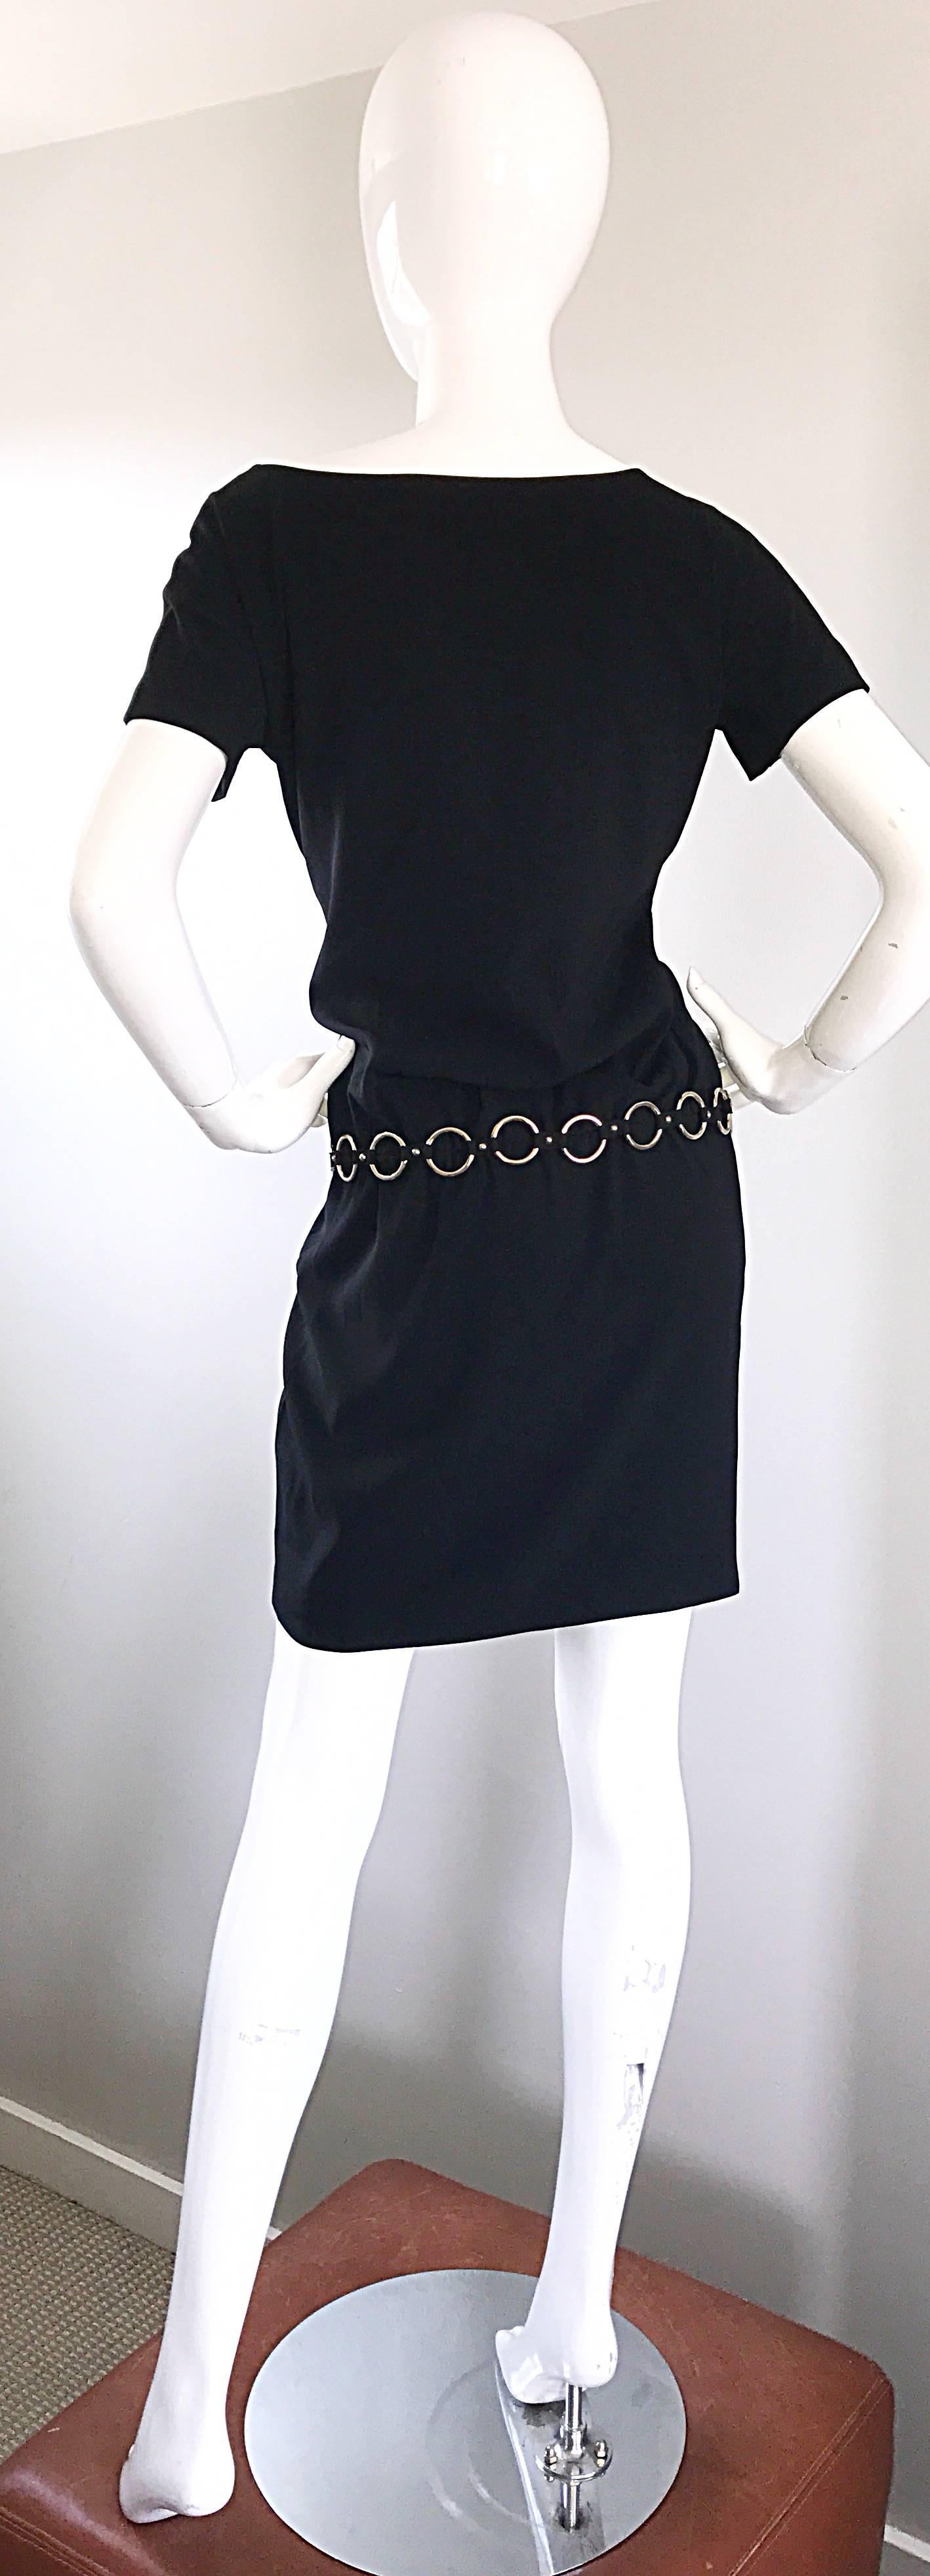 1990s Moschino Cheap & Chic Black Silver Chain Loop Belt Vintage Dress Size 6  For Sale 1